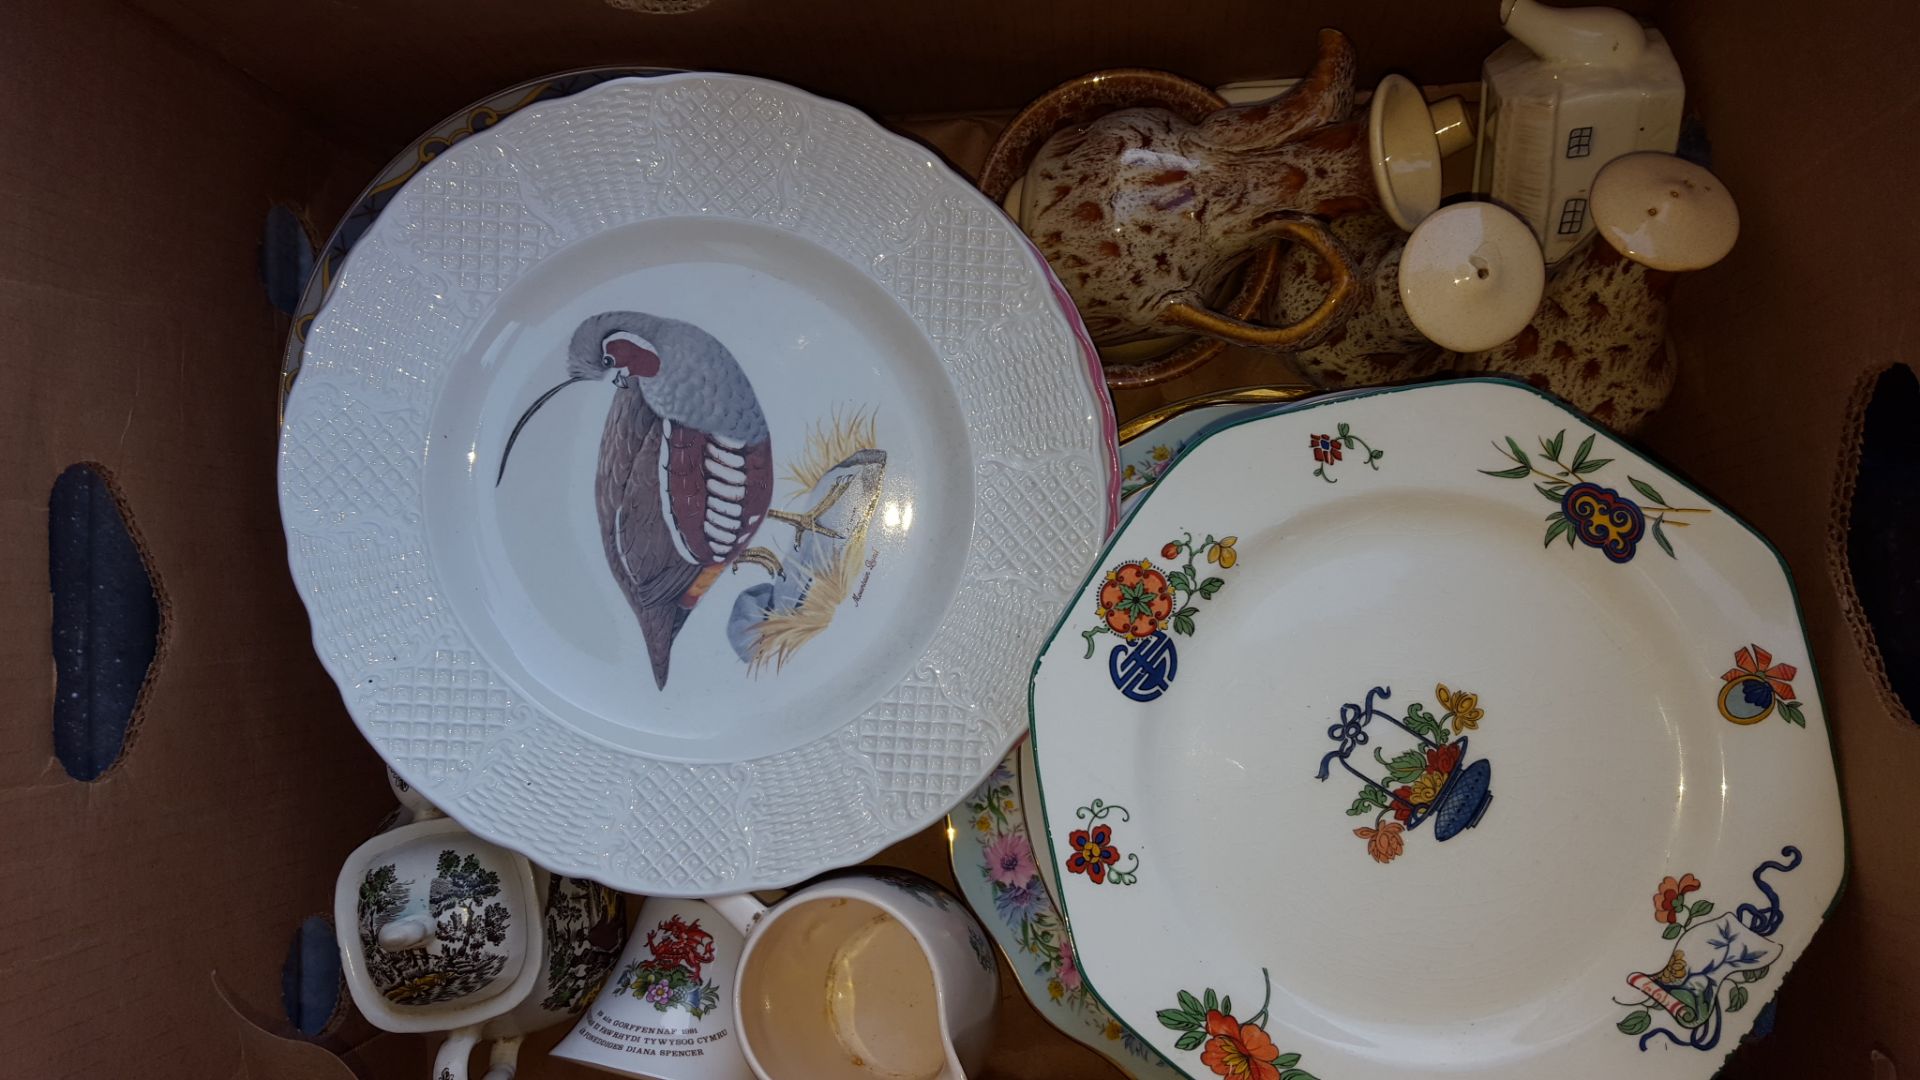 Box of Assorted Plates with Hunting or Game Scenes - Image 3 of 5